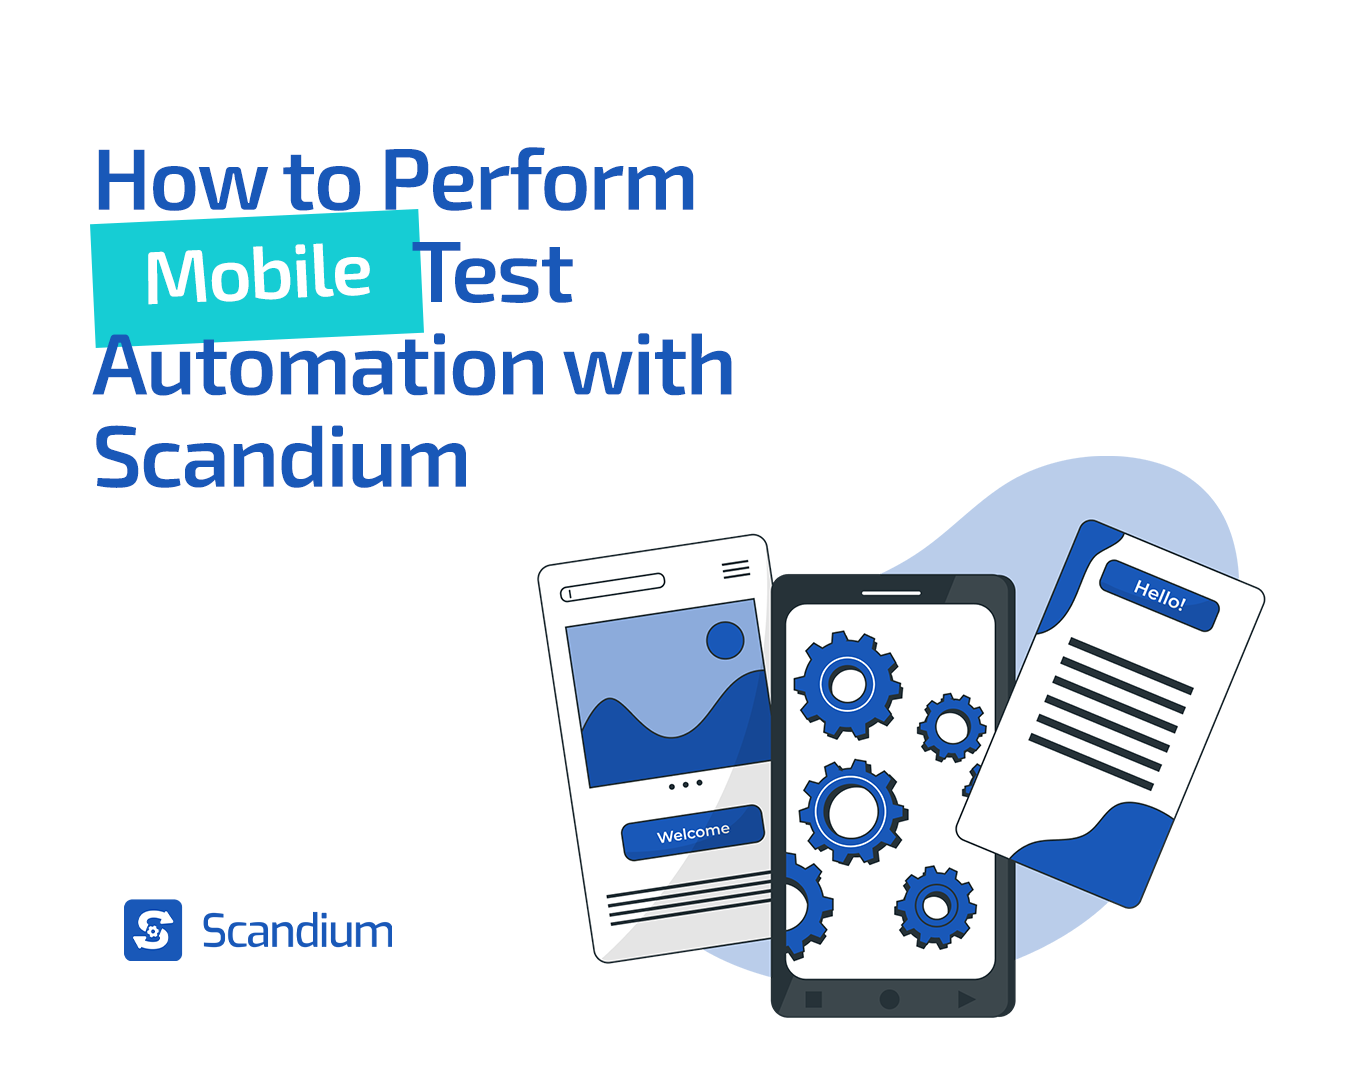 How to Perform Mobile Test Automation with Scandium